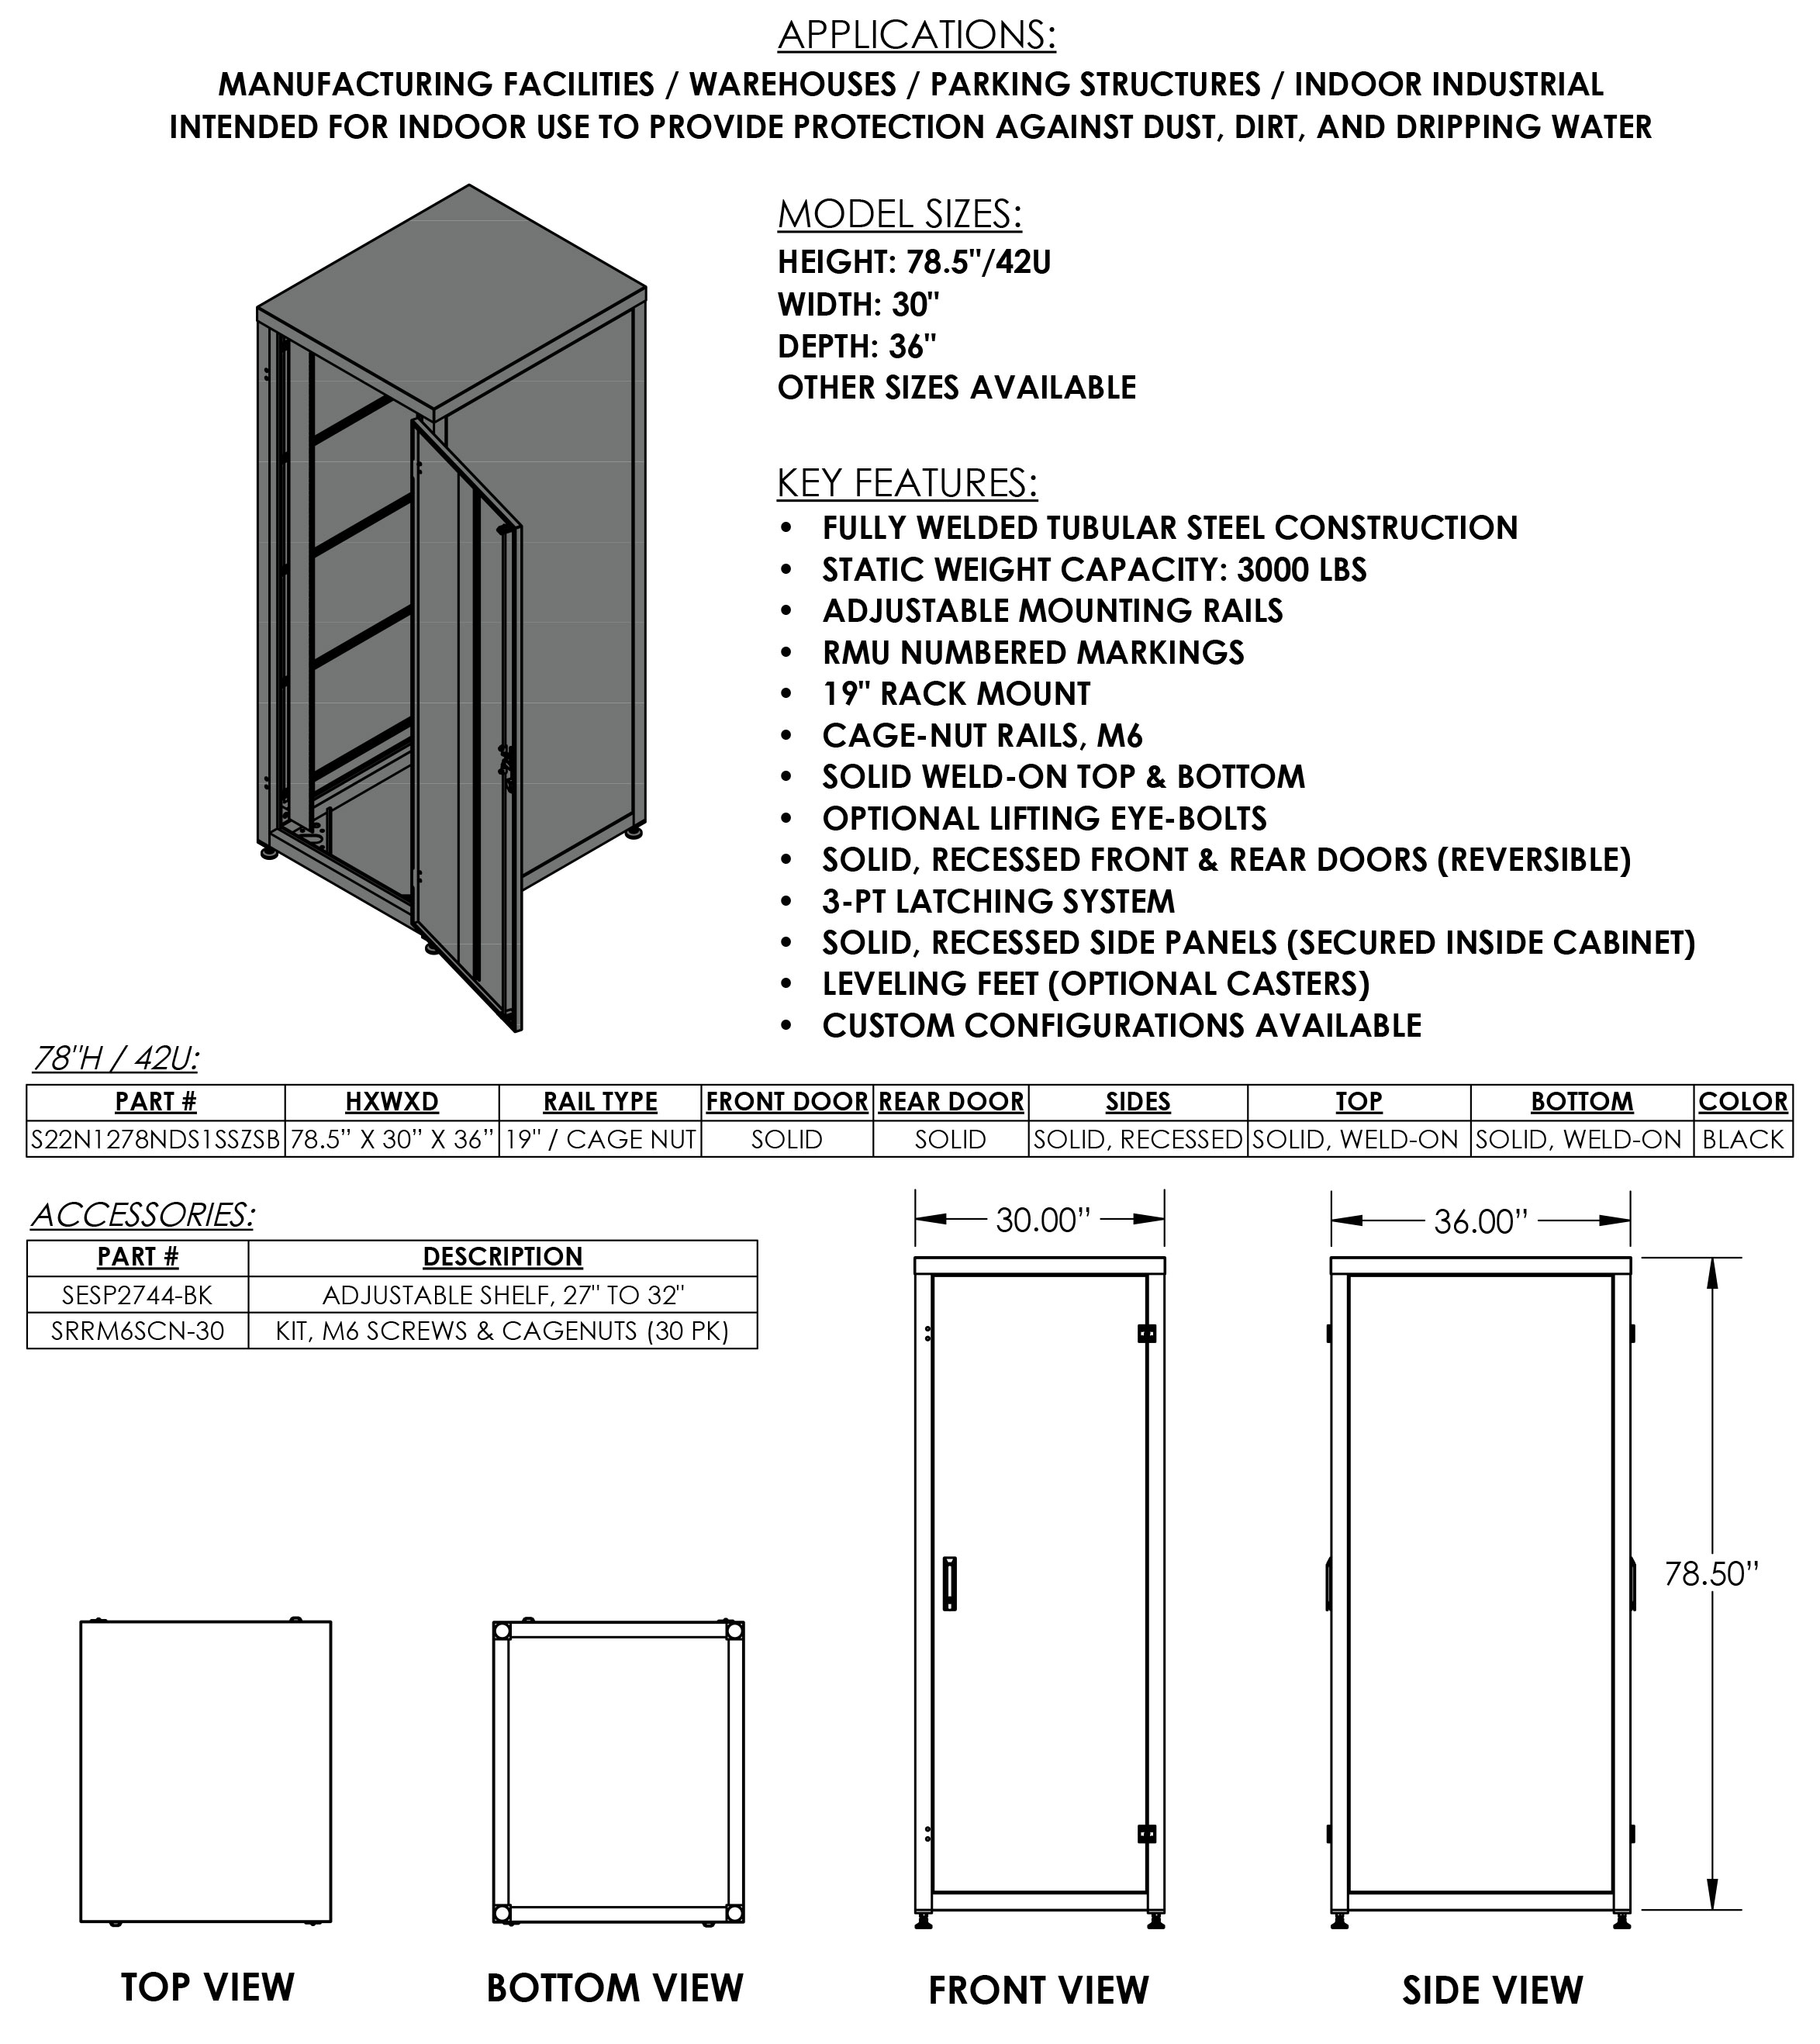 Series 22N12 Cabinet System